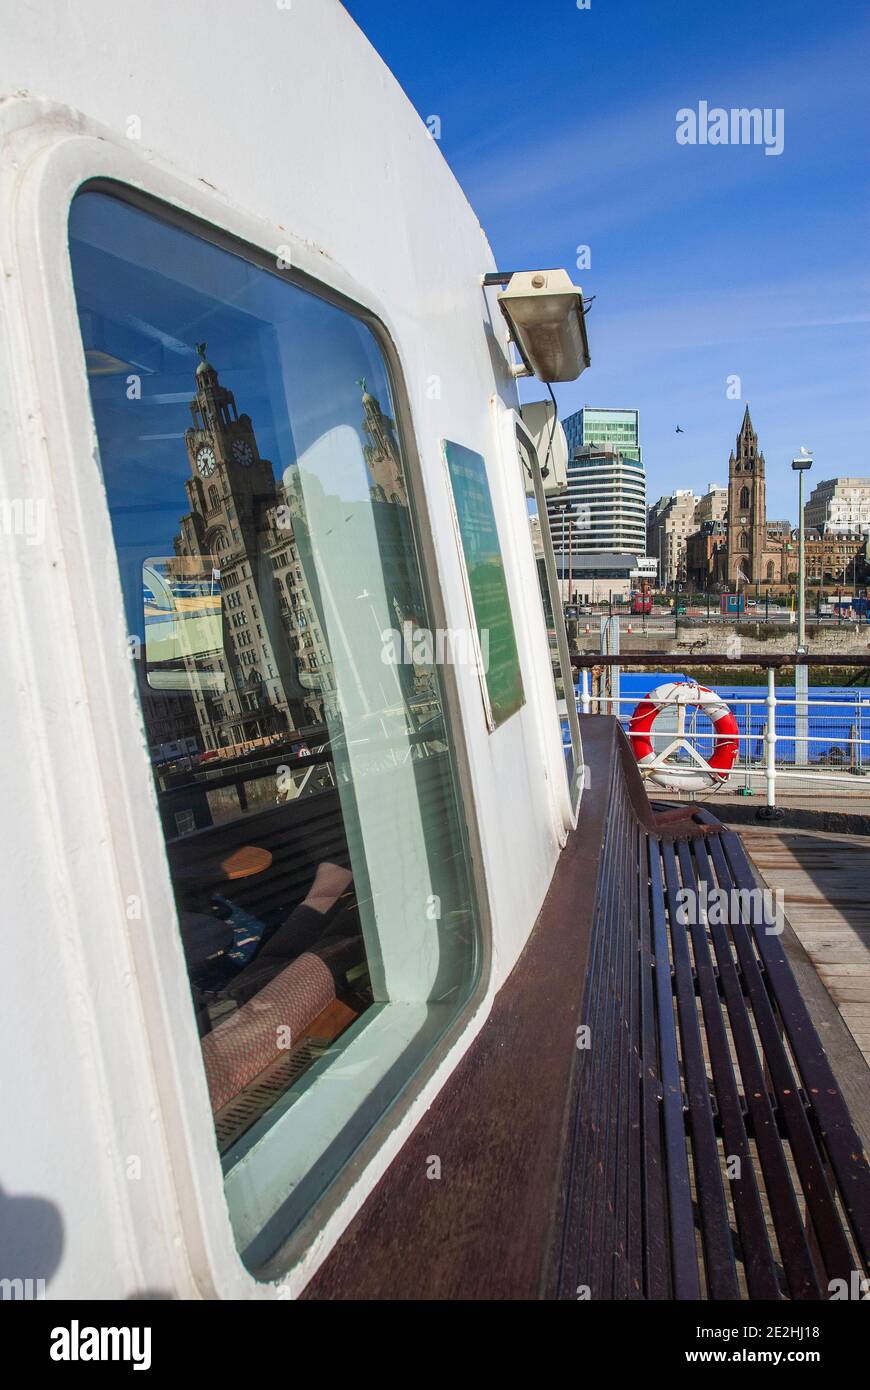 A Mersey ferry pictured berthed at the Liverpool Pier Head with the Parish church of St. Nicholas and the Royal Liver building in the background. Stock Photo